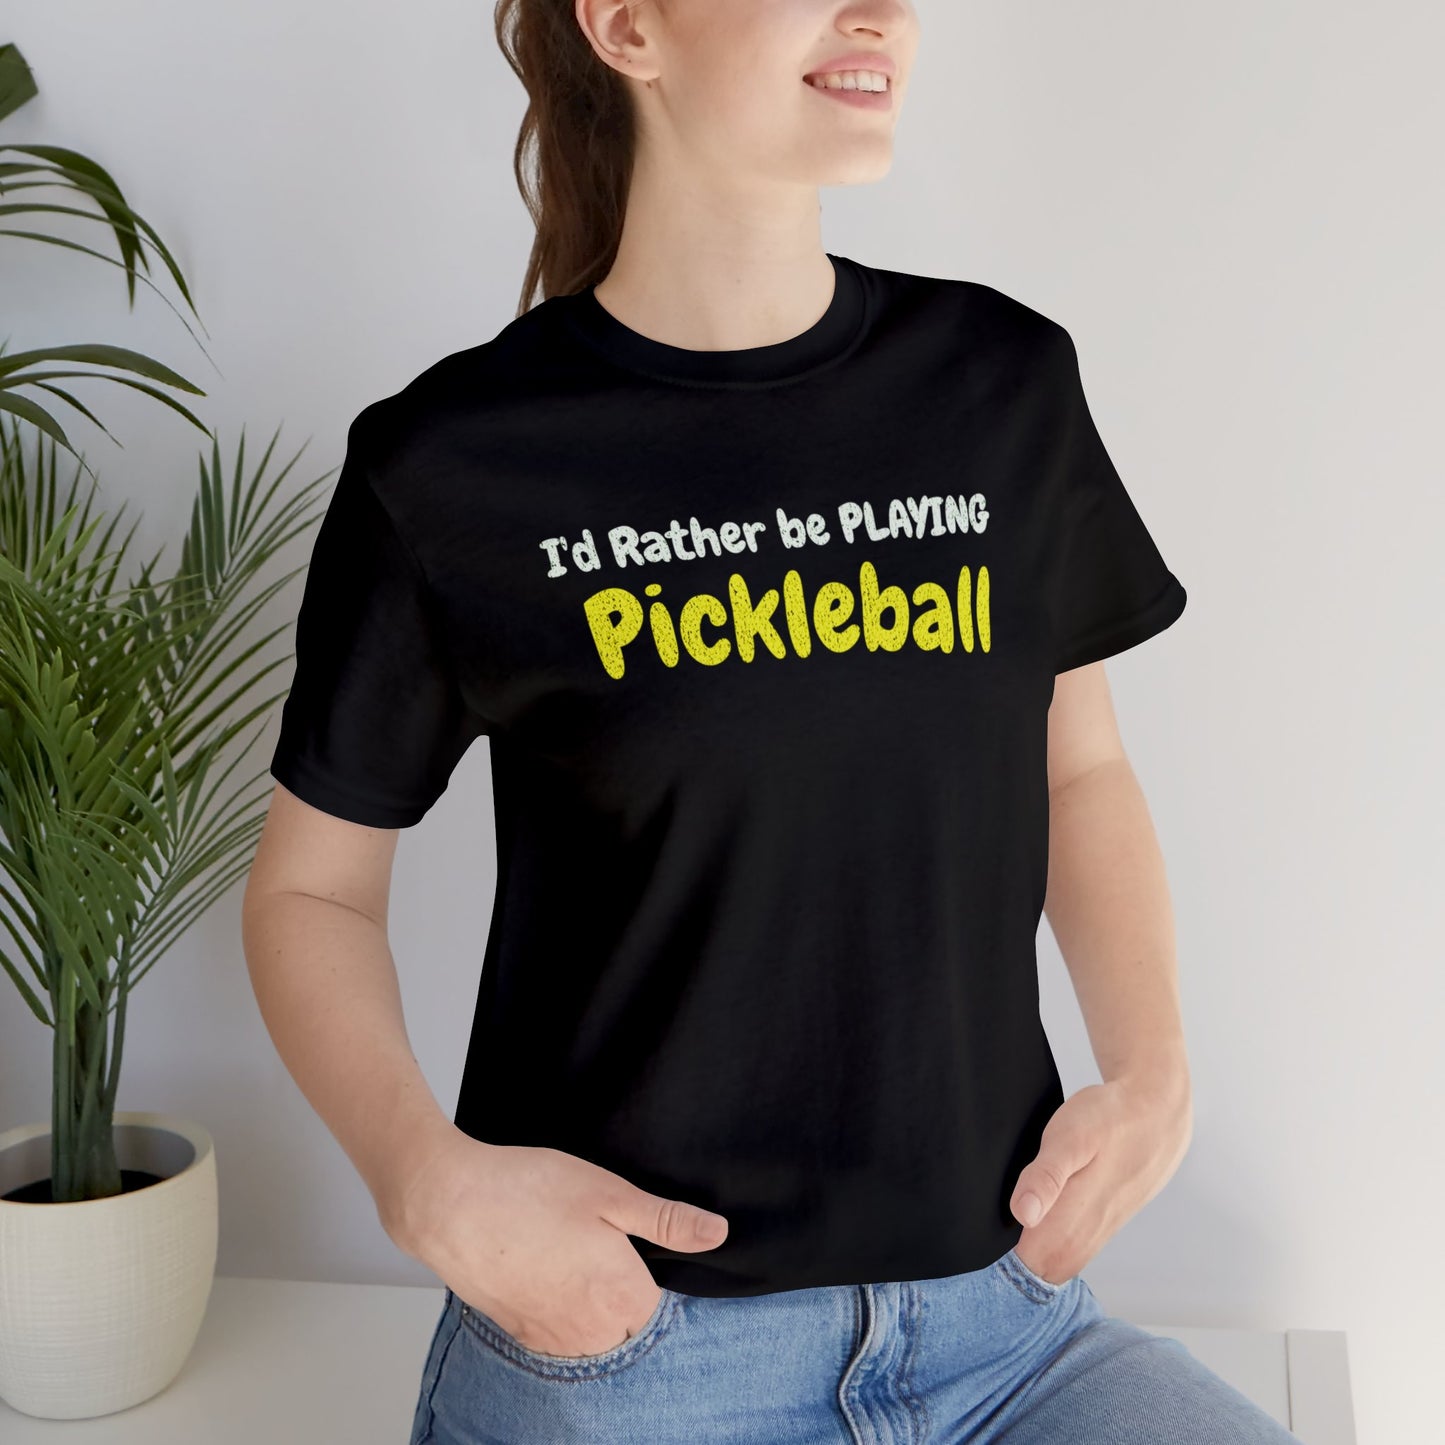 I'd Rather Be Playing Pickleball - T-Shirt